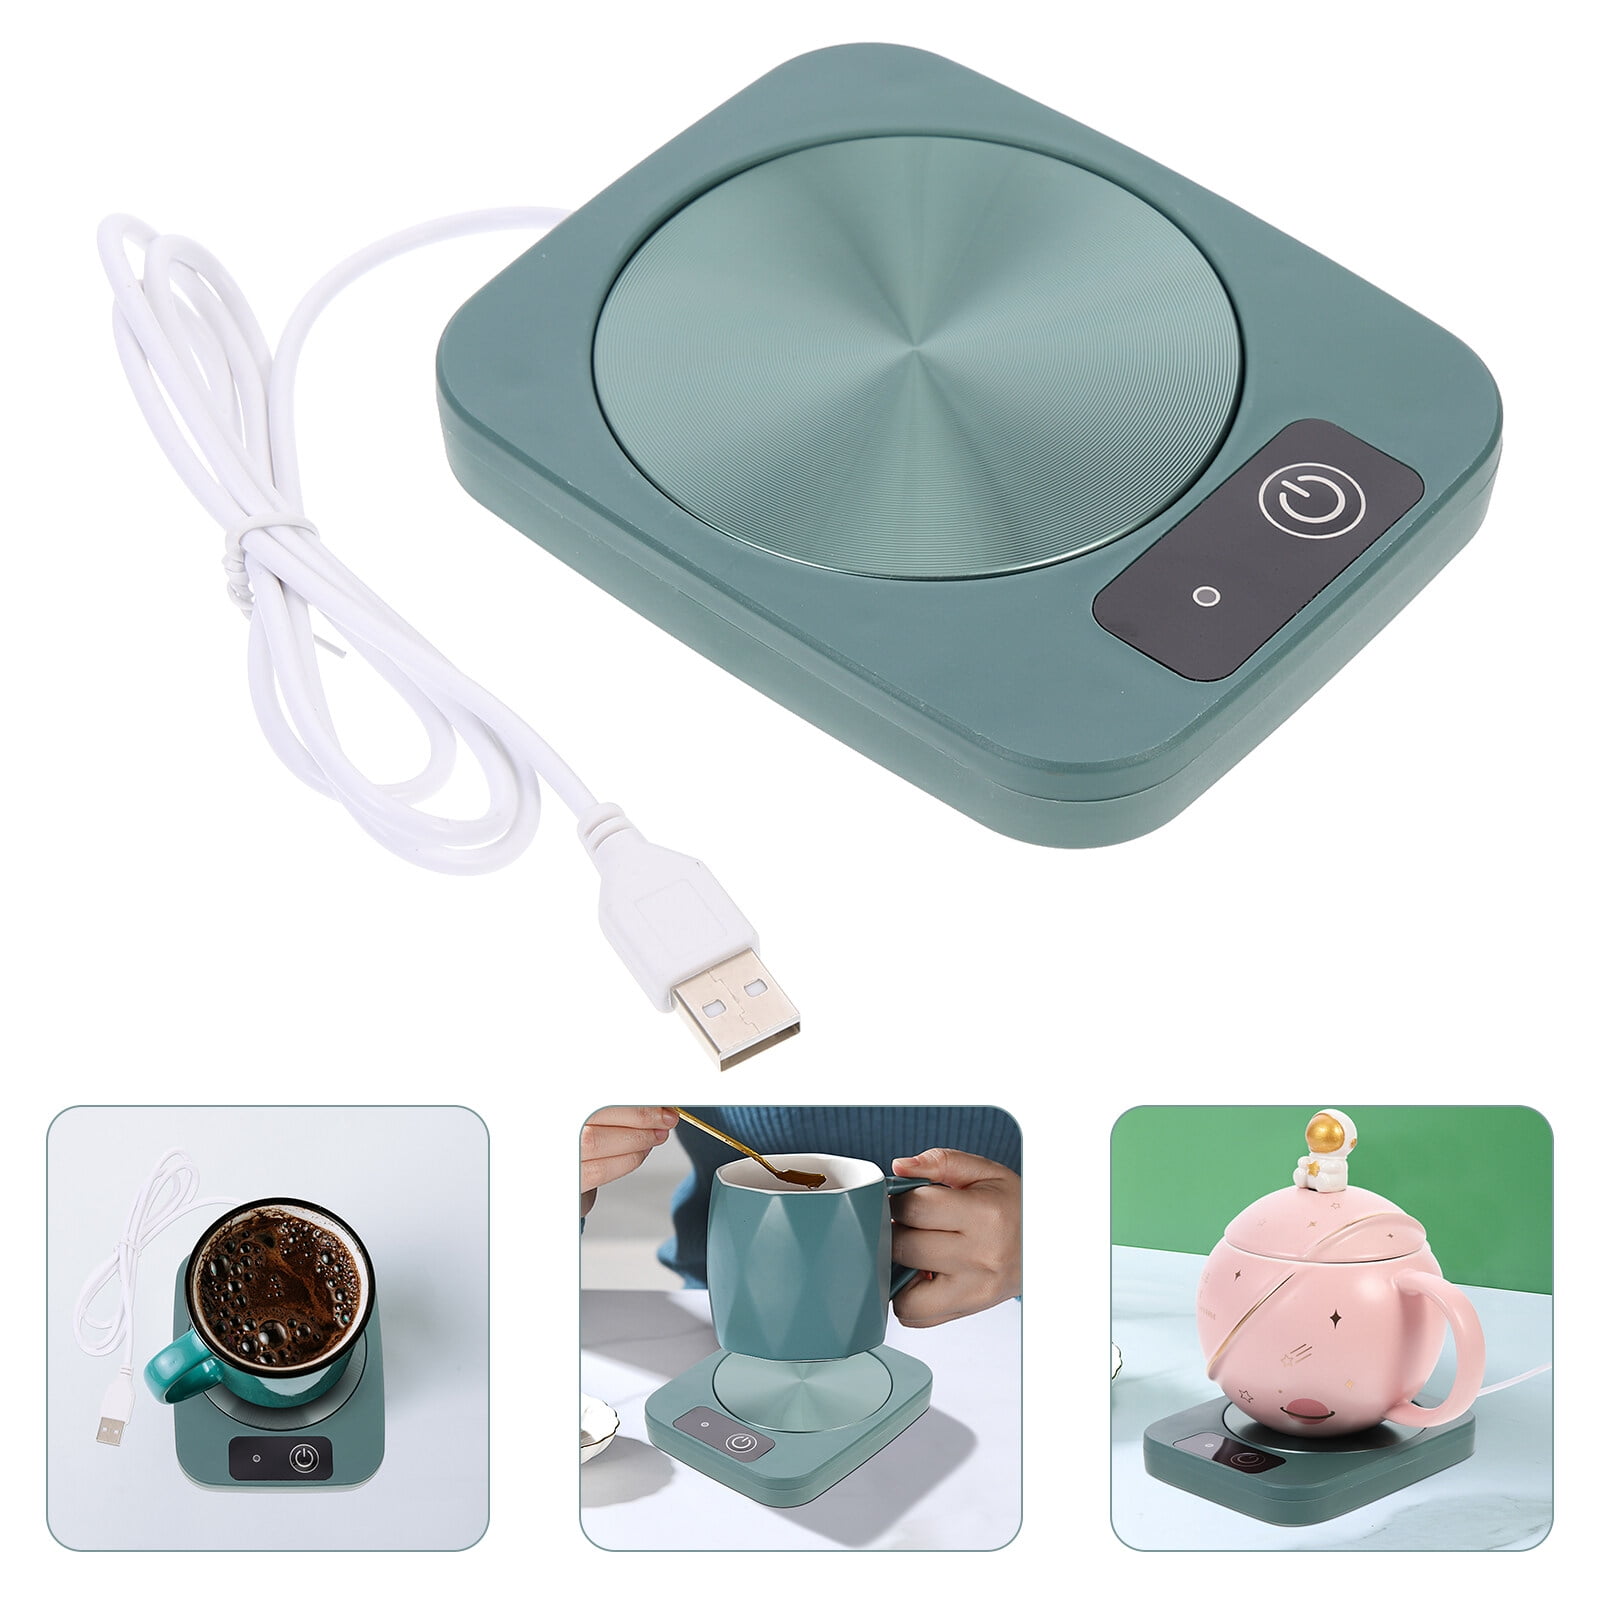 Mind Reader USB Coffee Mug Warmer for Desk, Tea Cup Warmer, Electric  Warming Plate for Drinks Beverage Water Cocoa Milk Set, 3 Piece - Macy's